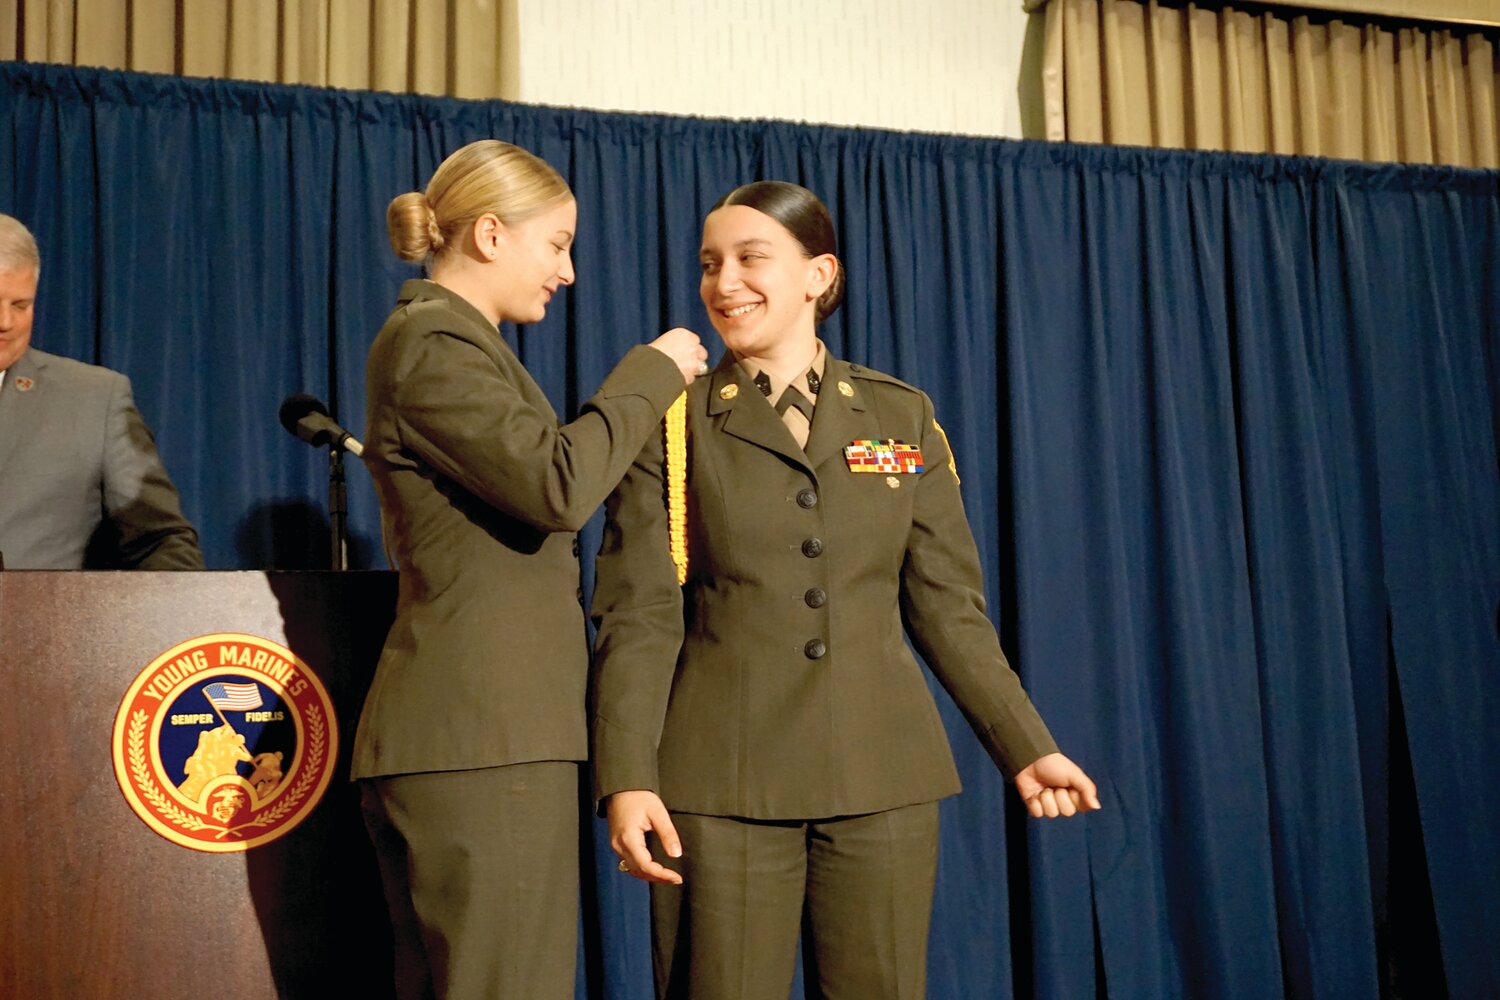 Susan Suber of Pipersville receives the ceremonial gold braid signifying the beginning of her year as National Young Marine of the Year from outgoing 2023 winner, Isabel Benson of Lapeer County Young Marines in Lapeer, Mich.